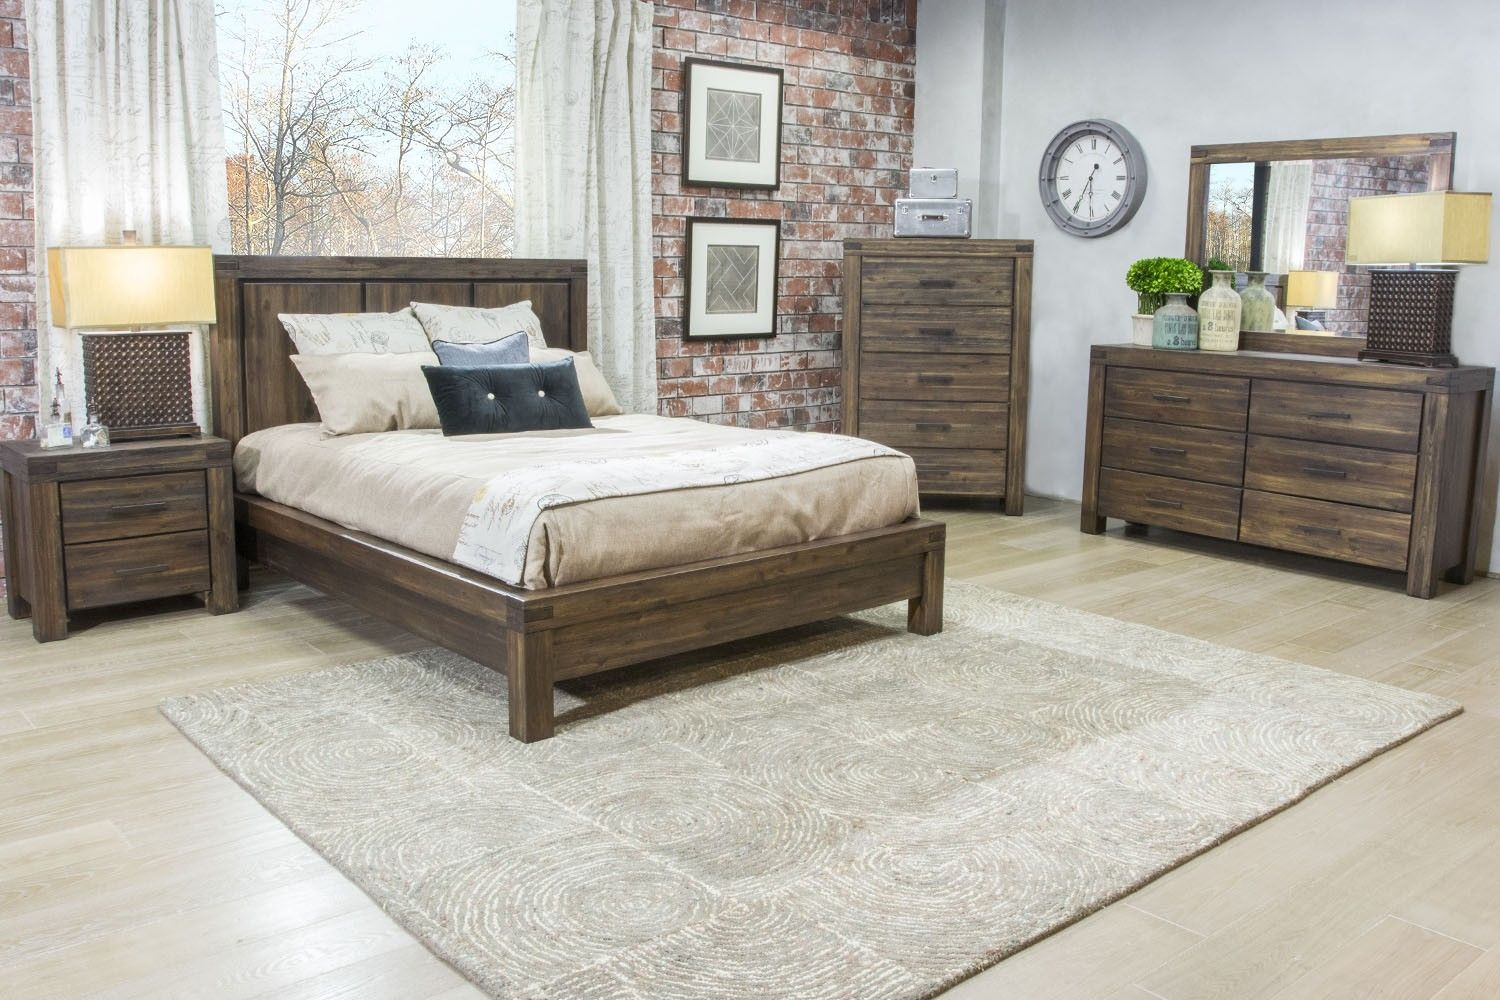 Mor Furniture For Less The Meadow Bedroom Mor Furniture For Less for dimensions 1500 X 1000